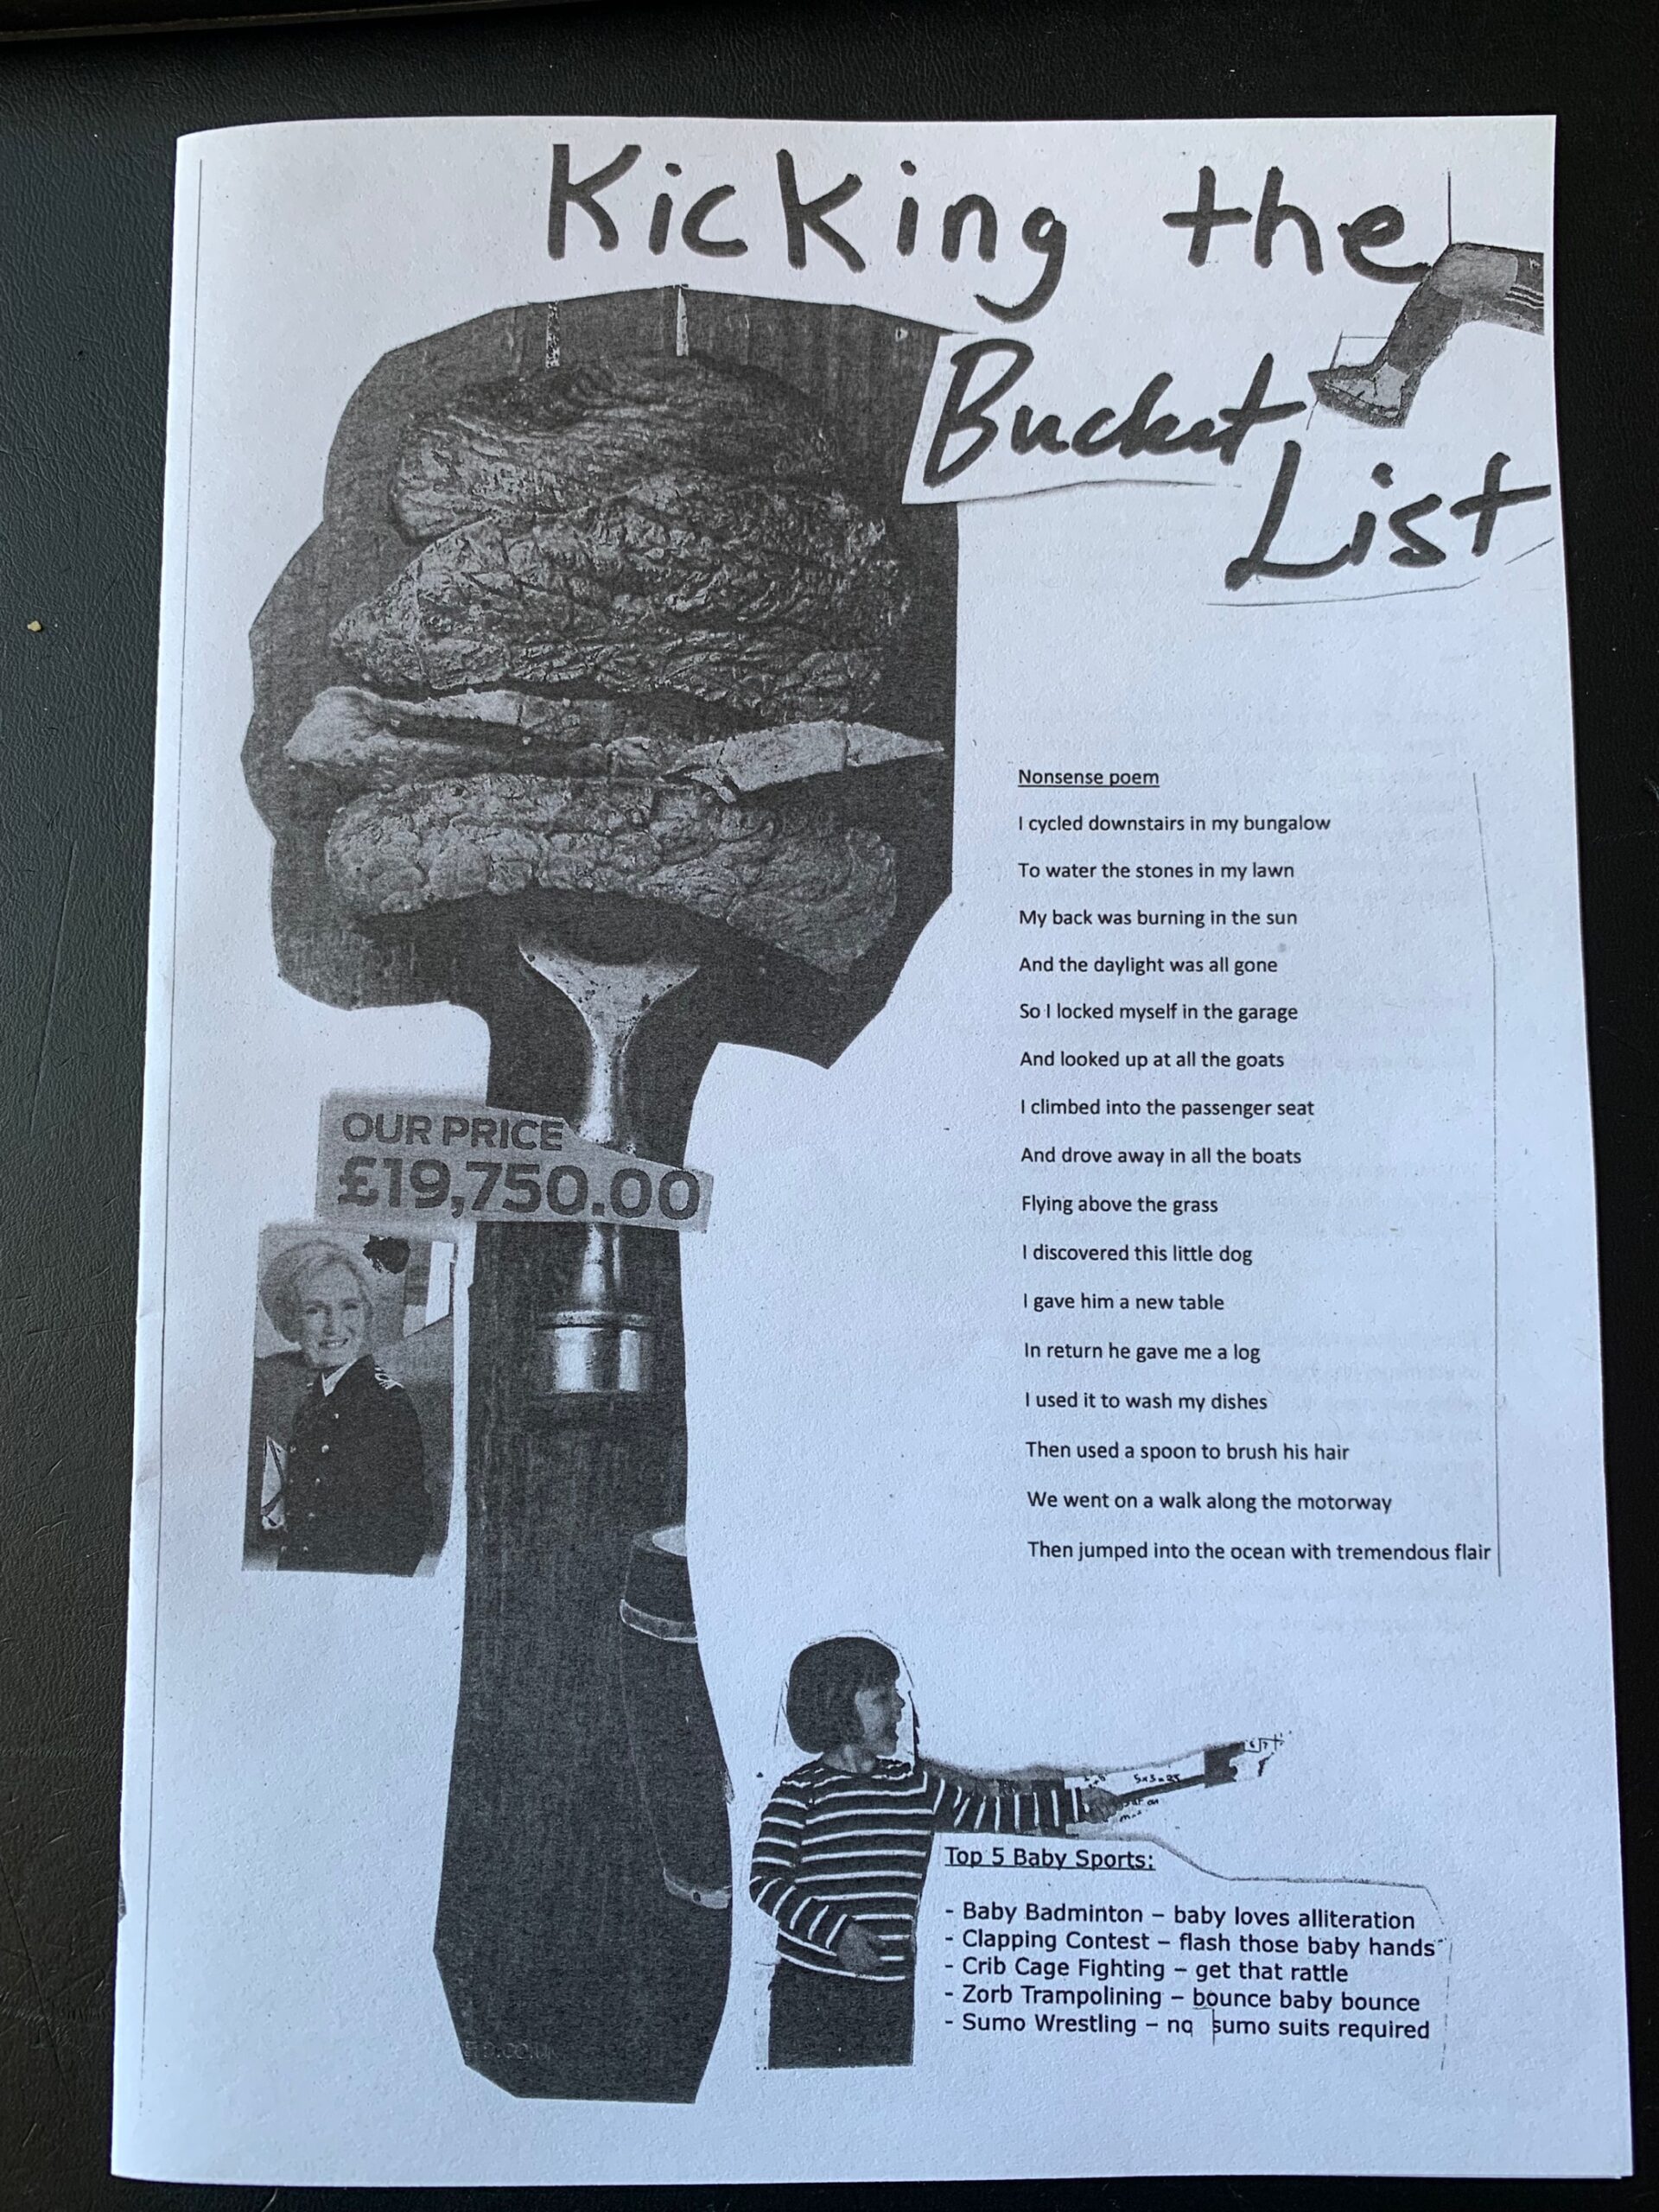 Front cover of zine with images and text in black and white